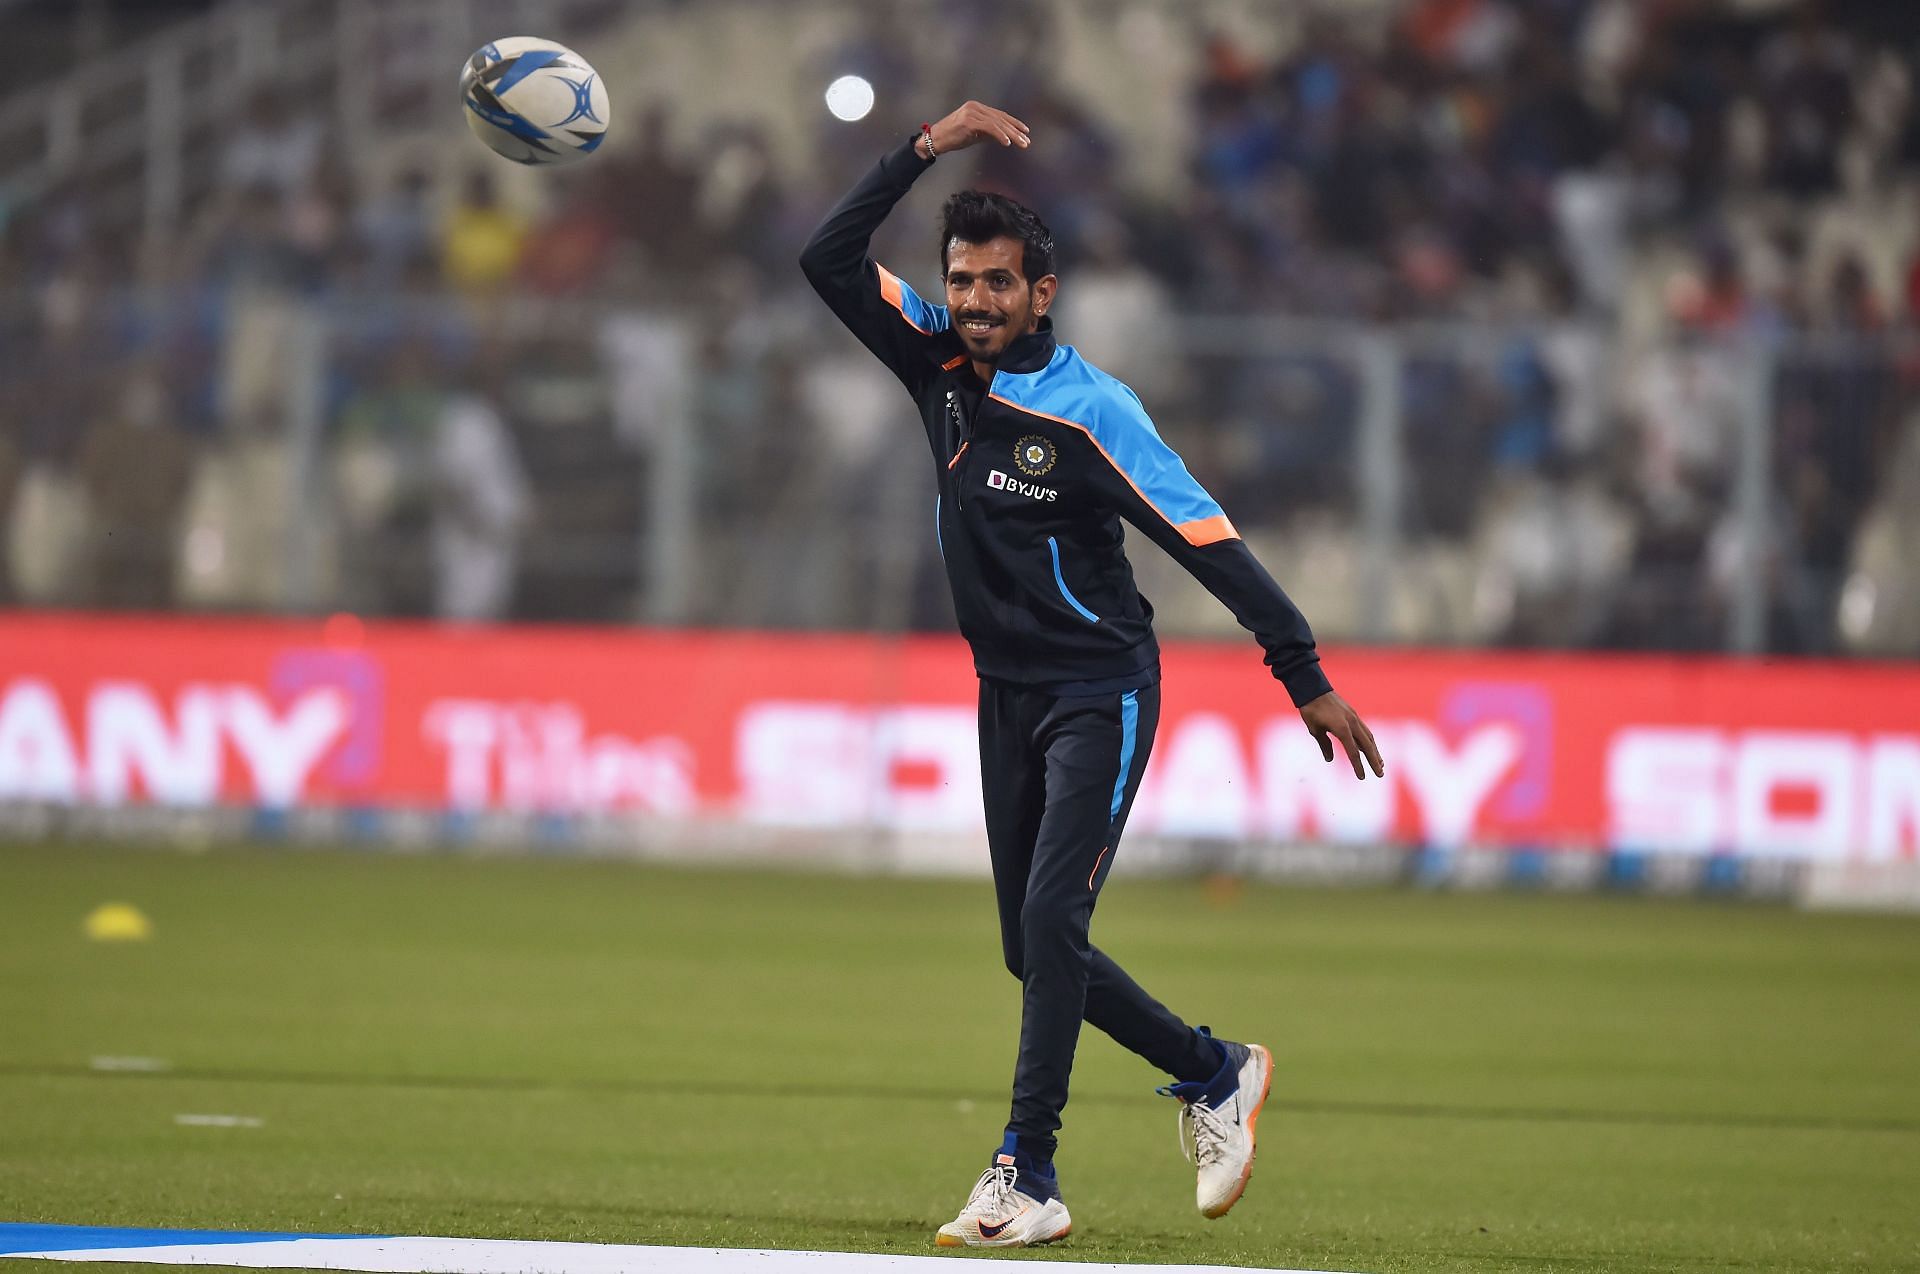 Premium leg-spinners like Yuzvendra Chahal are yet to feature in whites for India